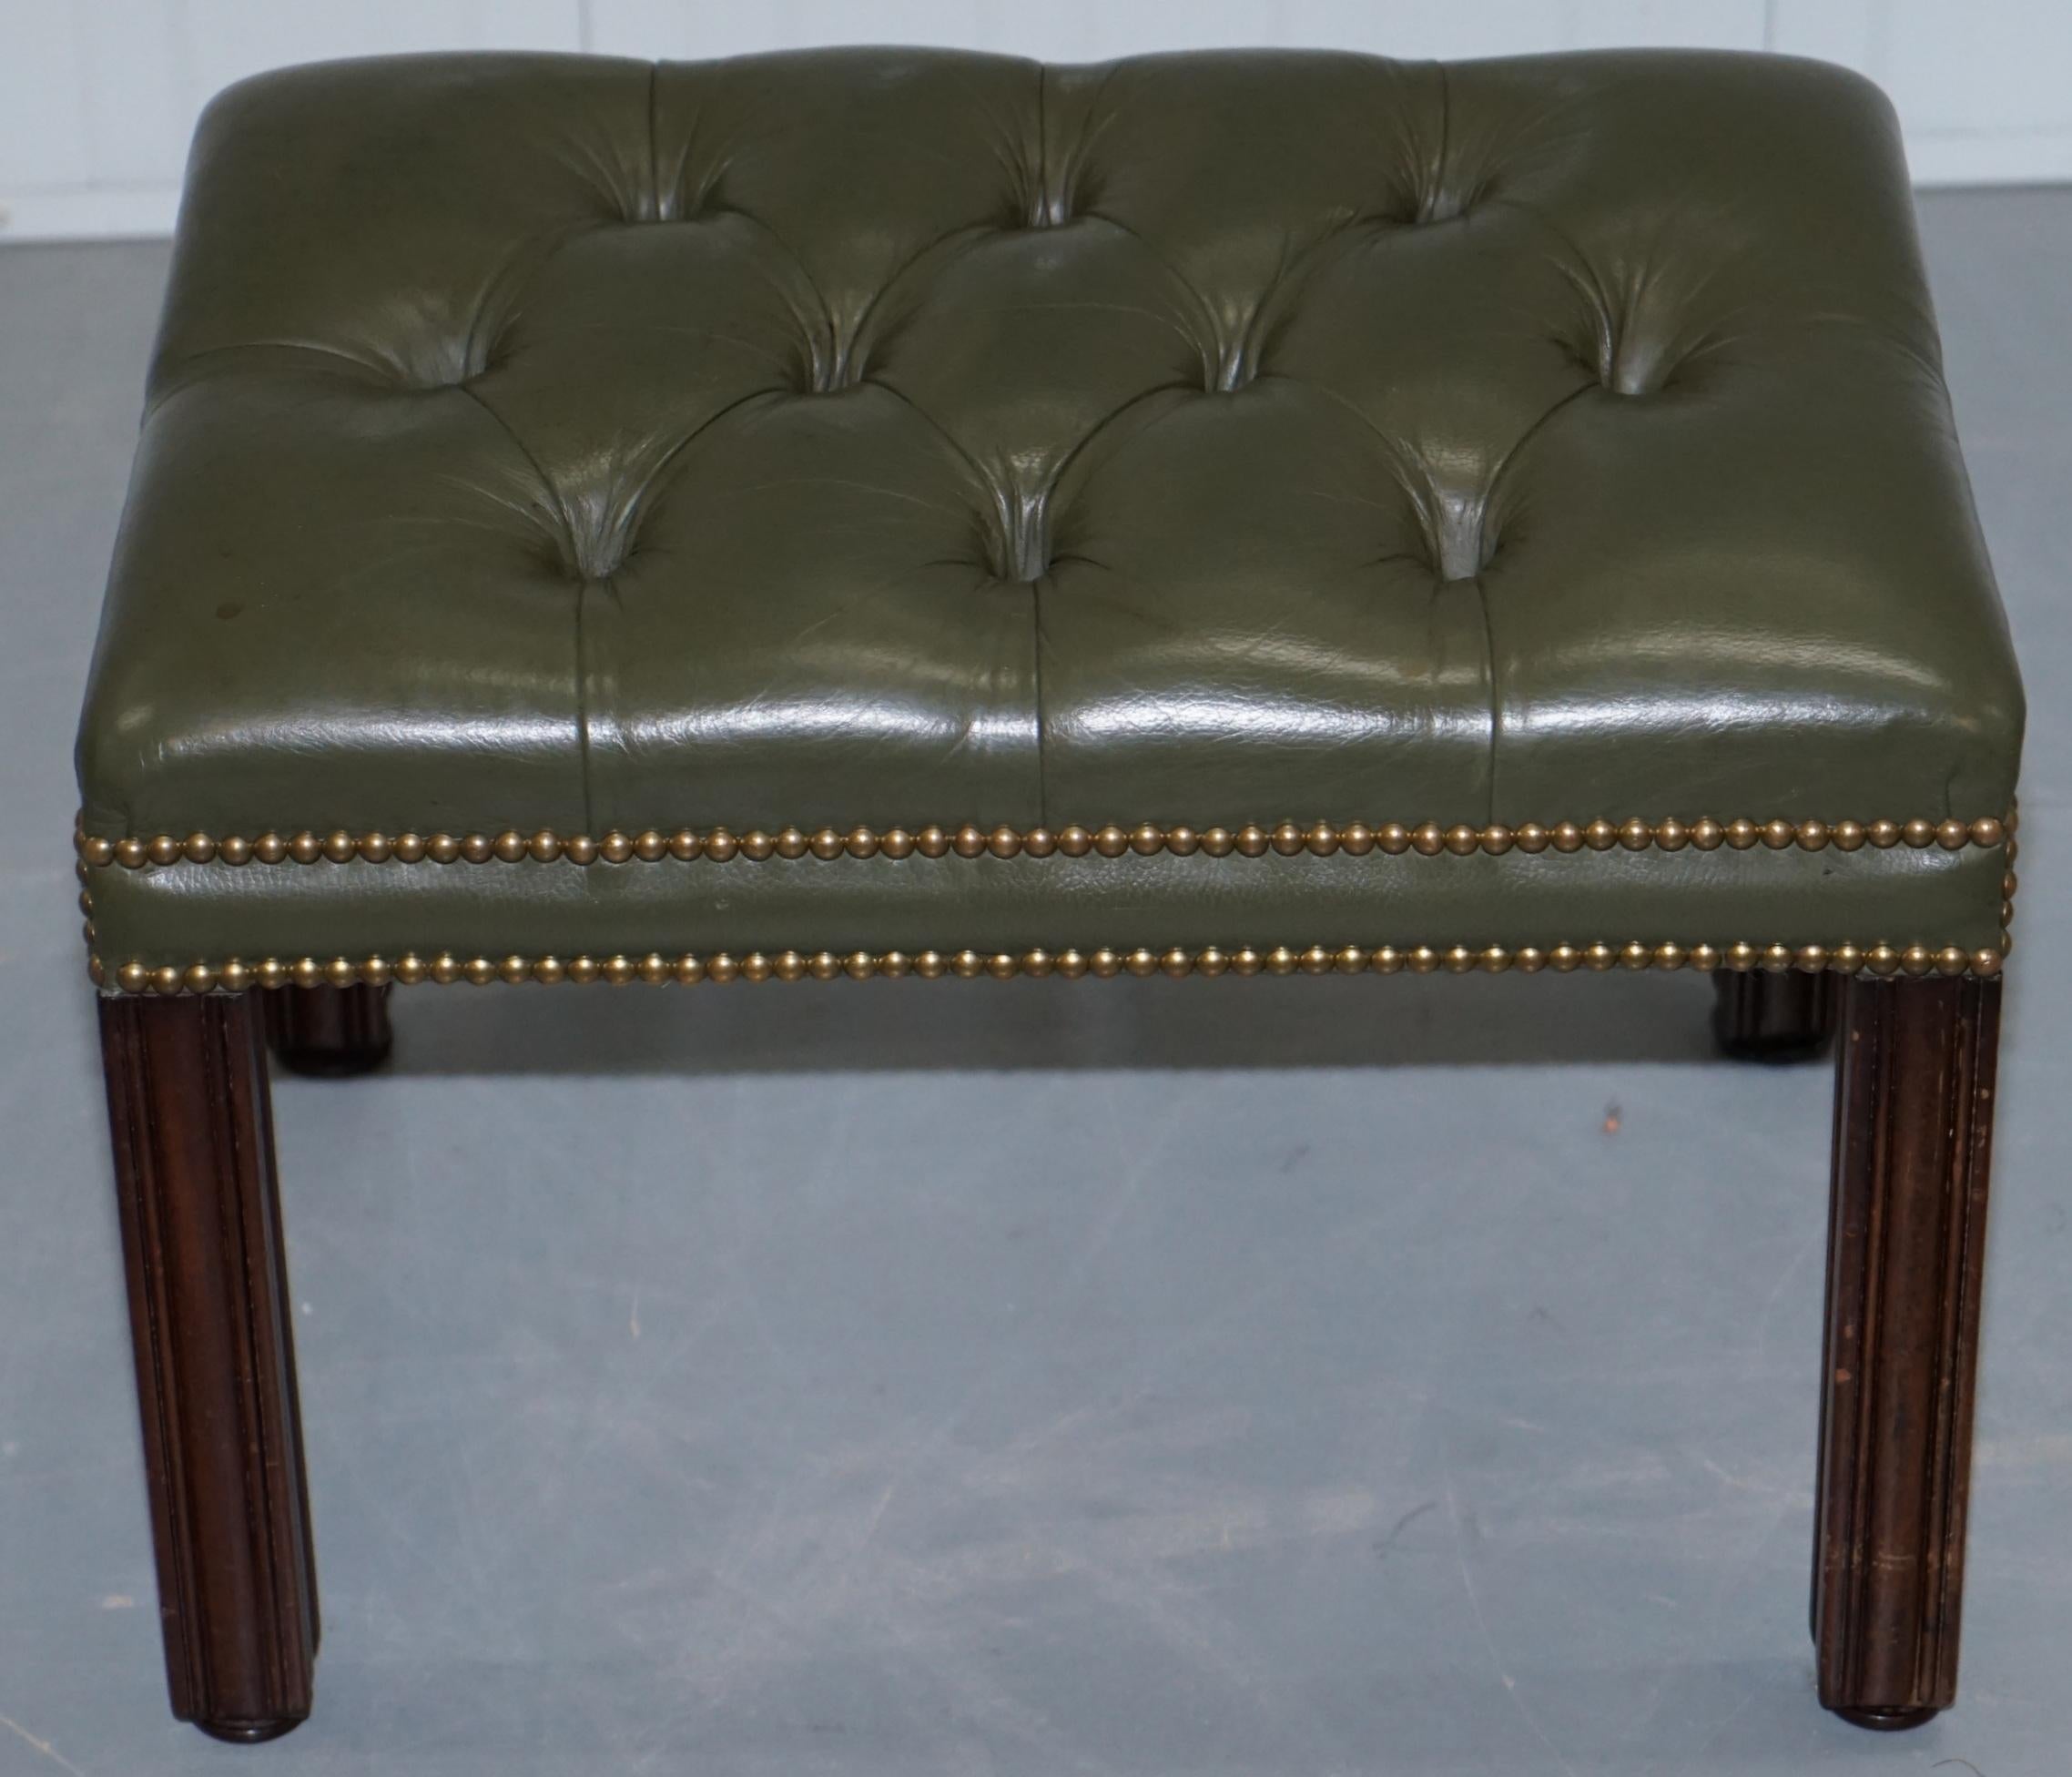 We are delighted to offer for sale this lovely aged green leather Vintage Chesterfield footstool

We have deep cleaned hand condition waxed and hand polished the leather and wood frame from top to bottom, it has a lovely vintage look and feels to